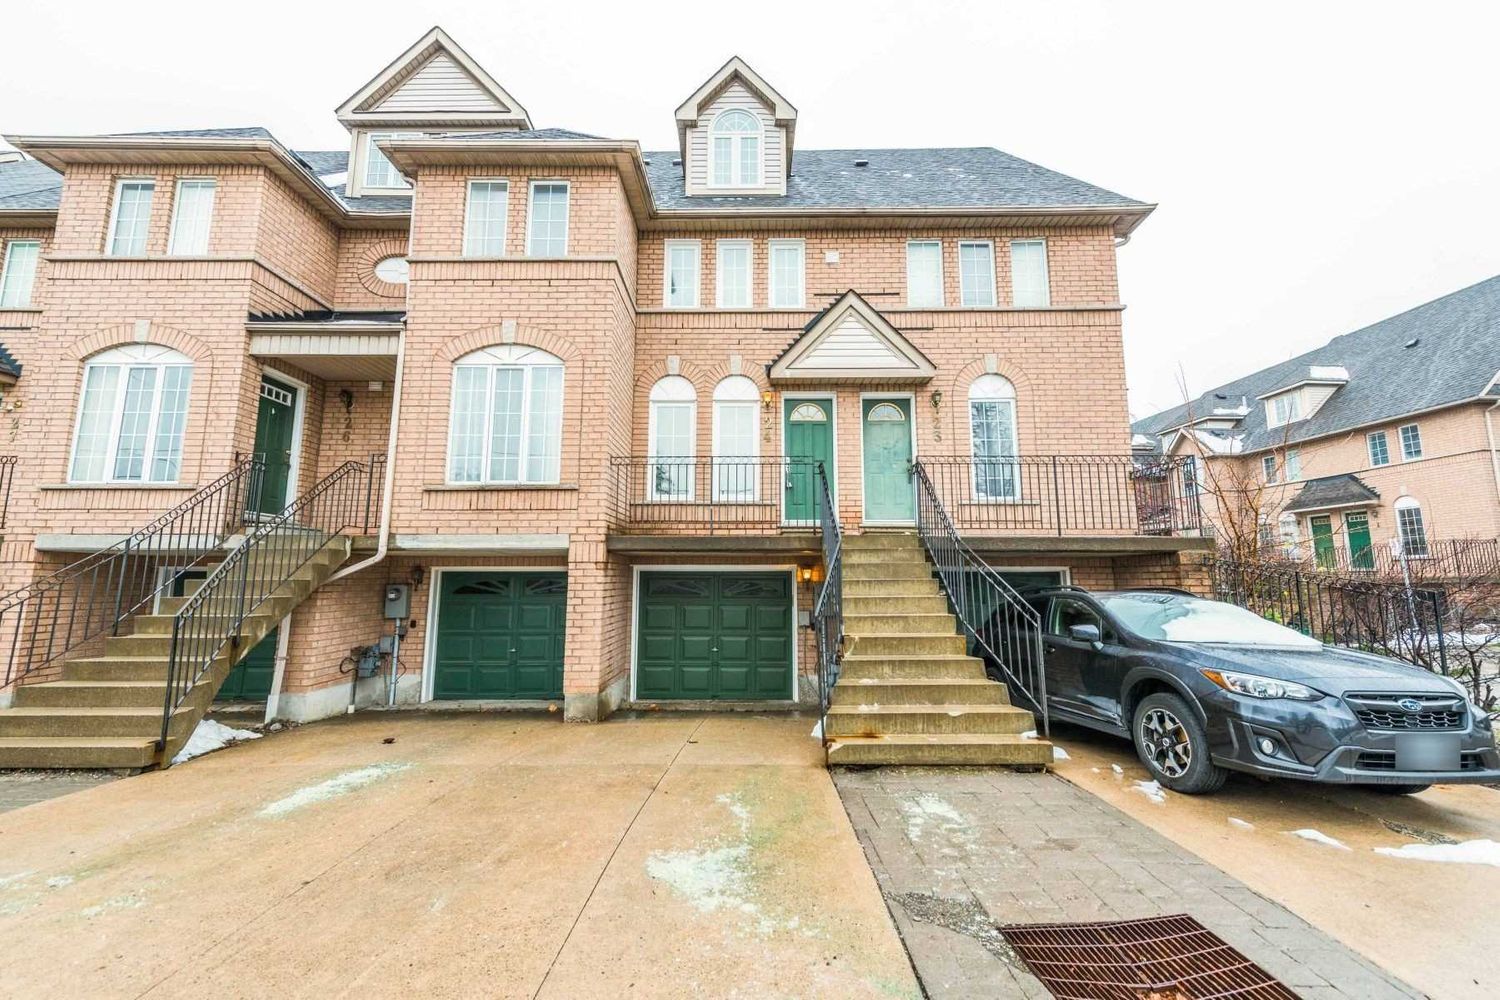 75 Strathaven Drive. 75 Strathaven Drive Townhomes is located in  Mississauga, Toronto - image #2 of 2